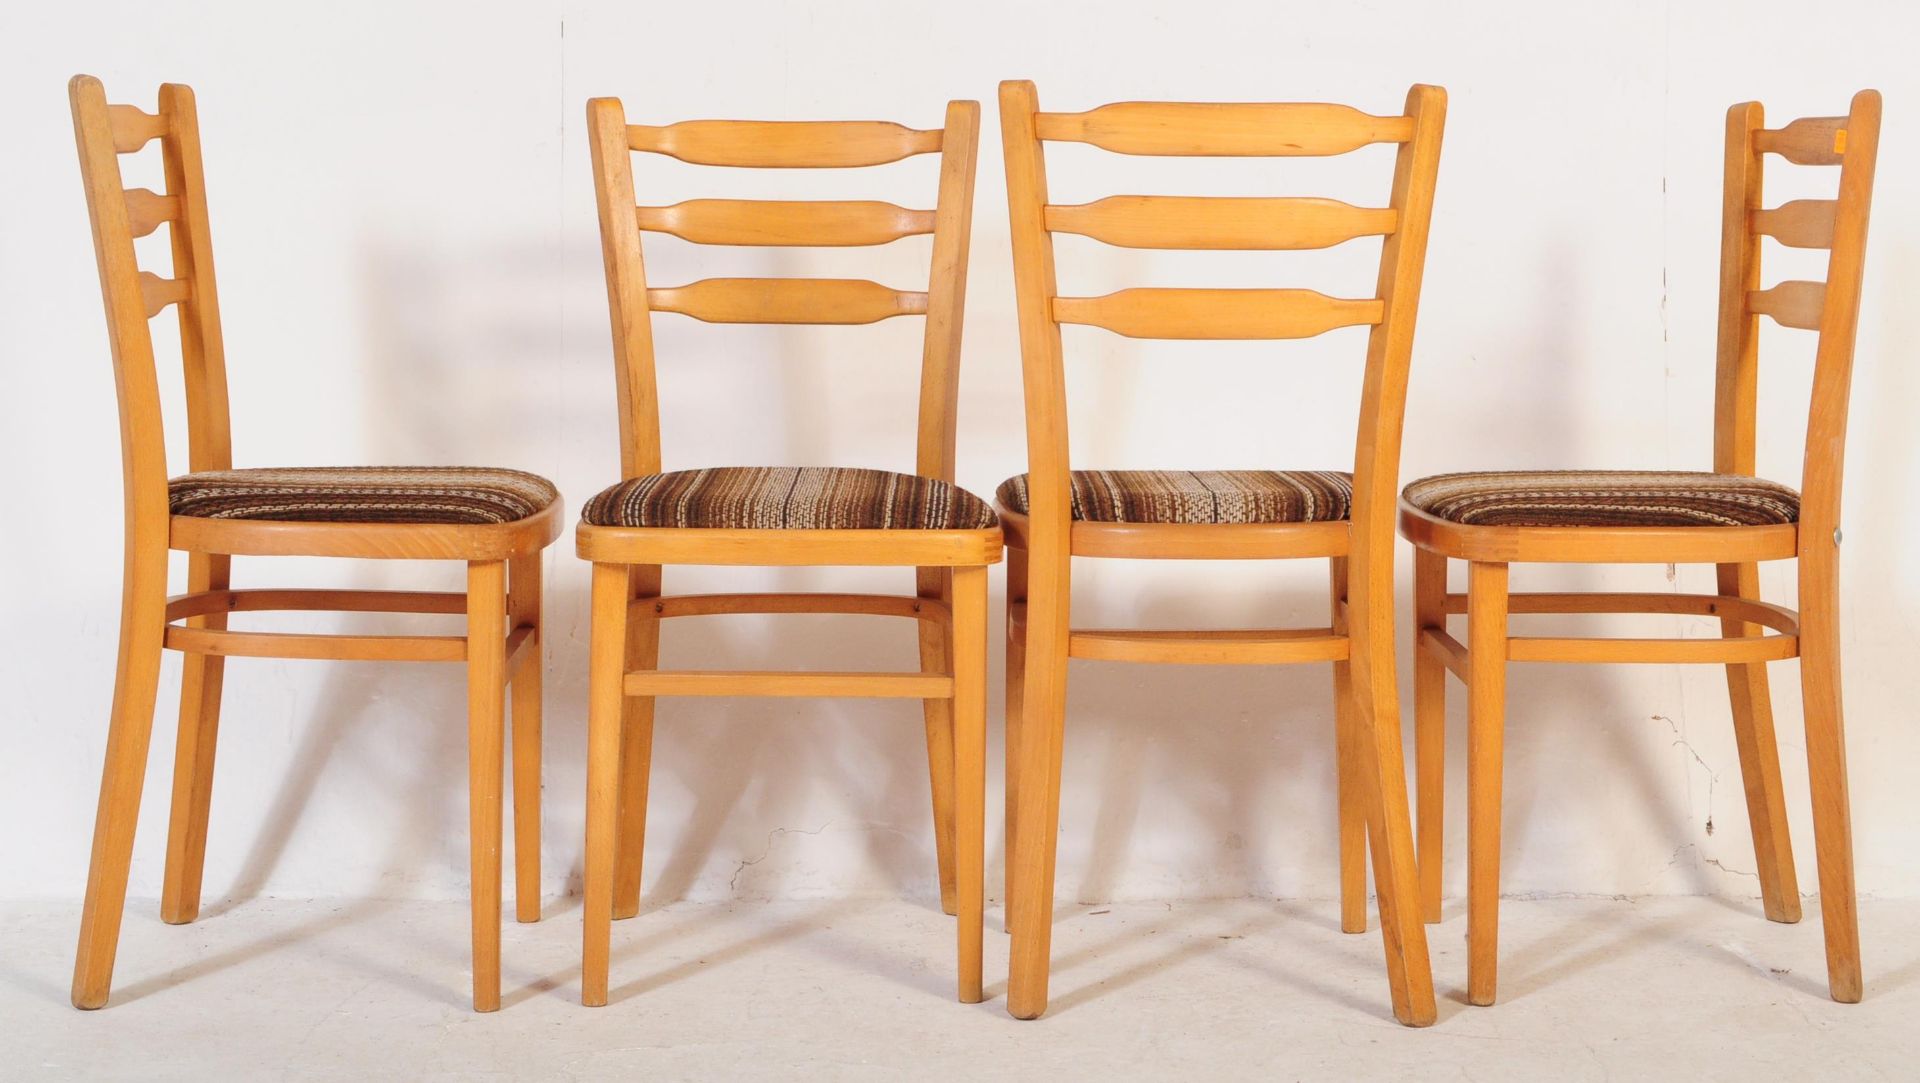 SIX VINTAGE RETRO 1960S KITCHEN DINING CHAIRS - Image 3 of 5